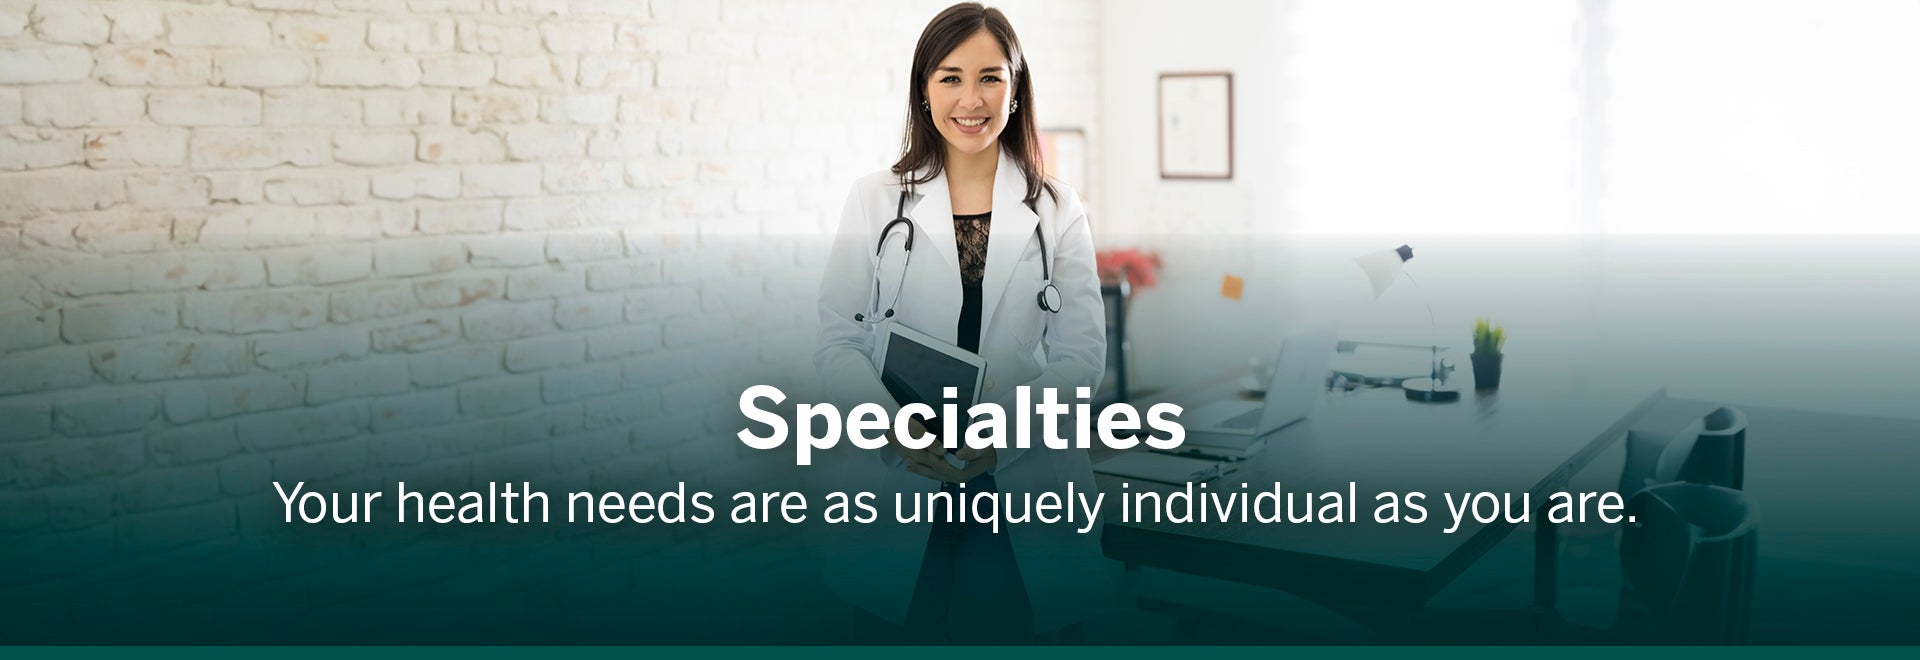 Specialties your health needs are as uniquely individual as you are with a doctor smiling inside her office.